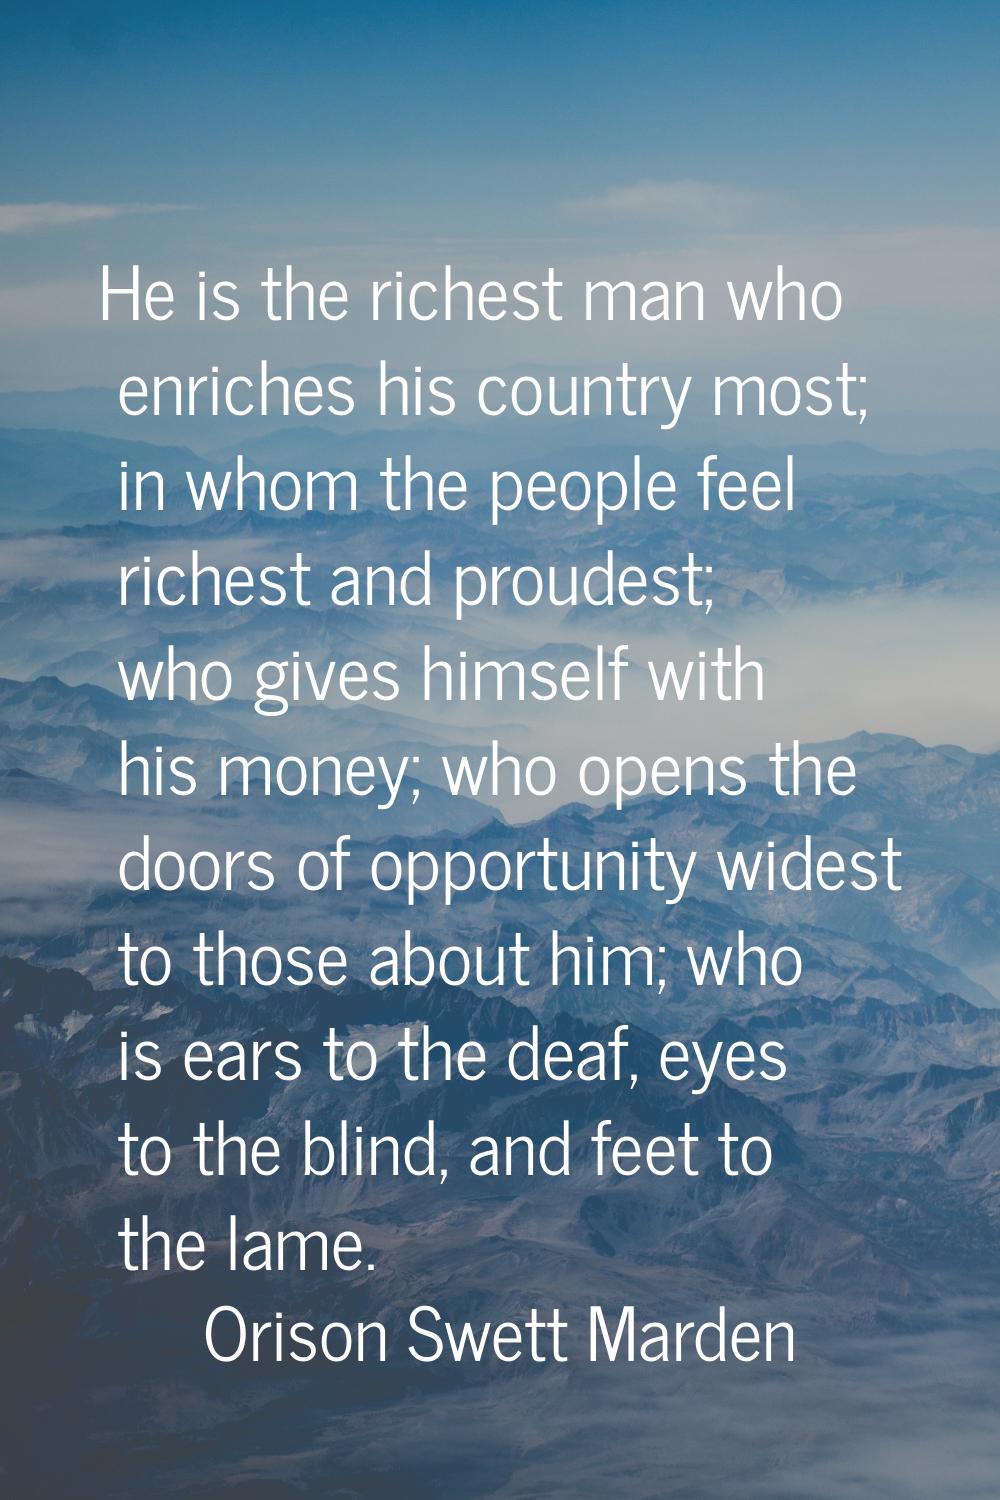 He is the richest man who enriches his country most; in whom the people feel richest and proudest; 